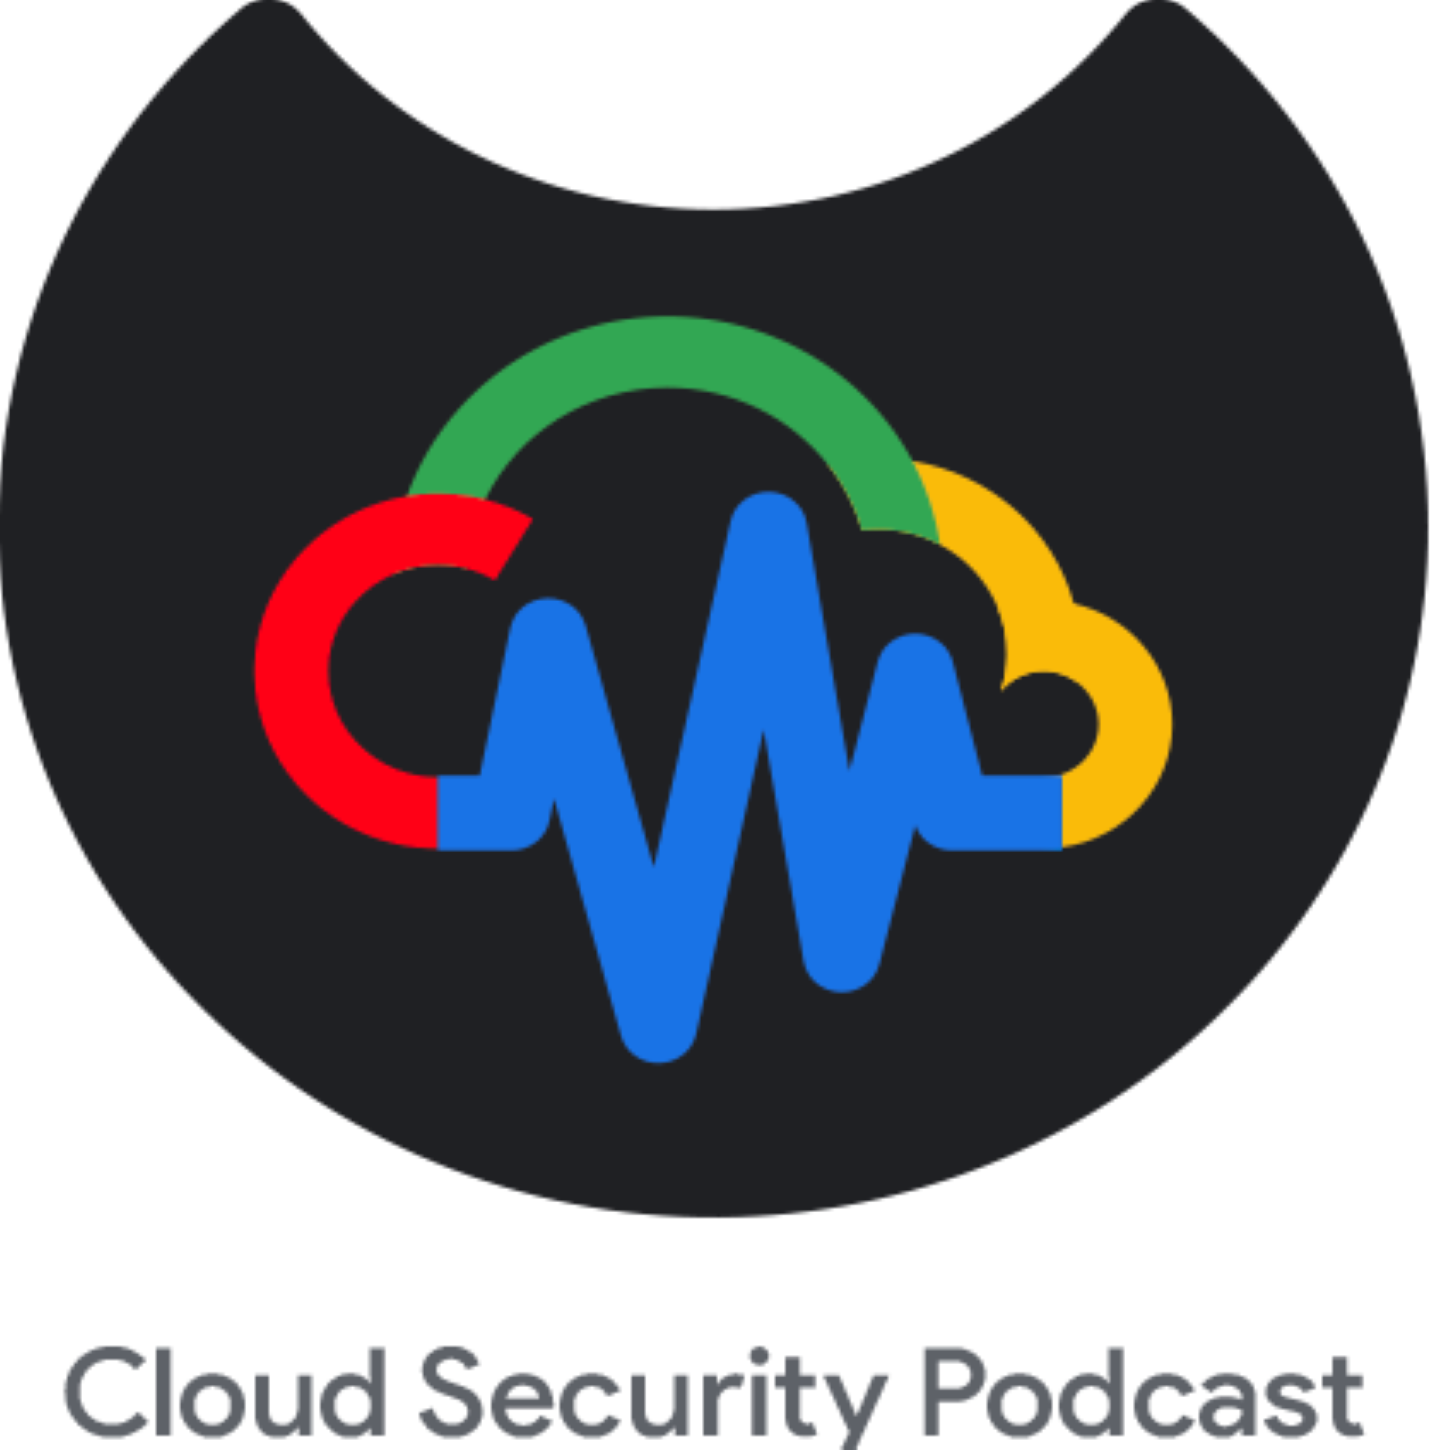 A highlight from EP148 Decoding SaaS Security: Demystifying Breaches, Vulnerabilities, and Vendor Responsibilities